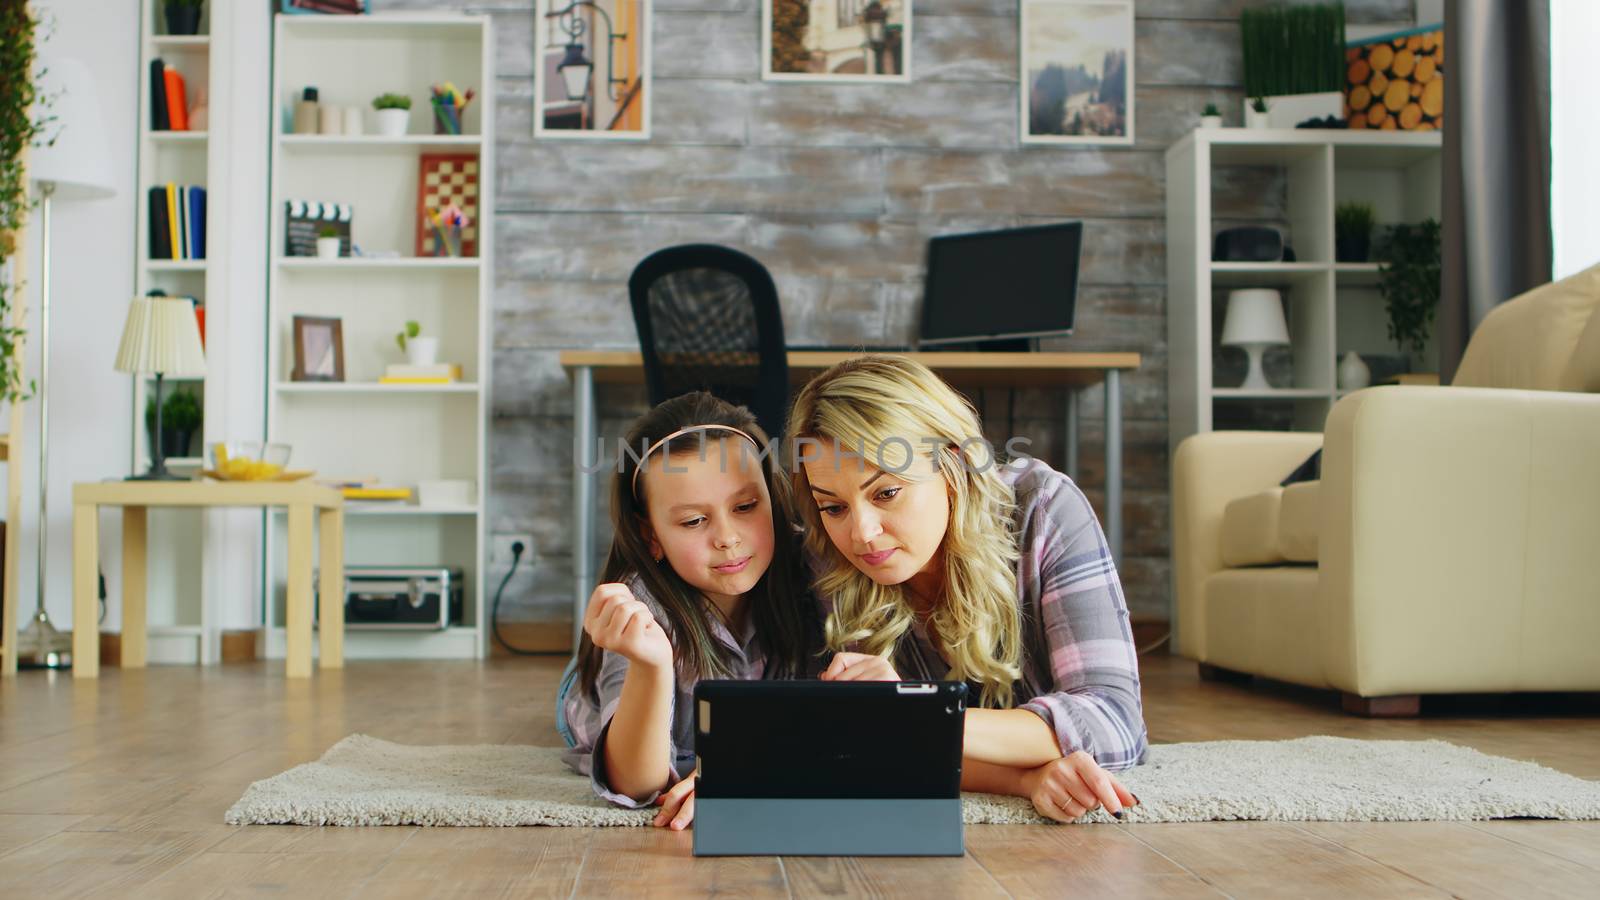 Cheerful little girl with her mother lying on the floor using tablet computer.